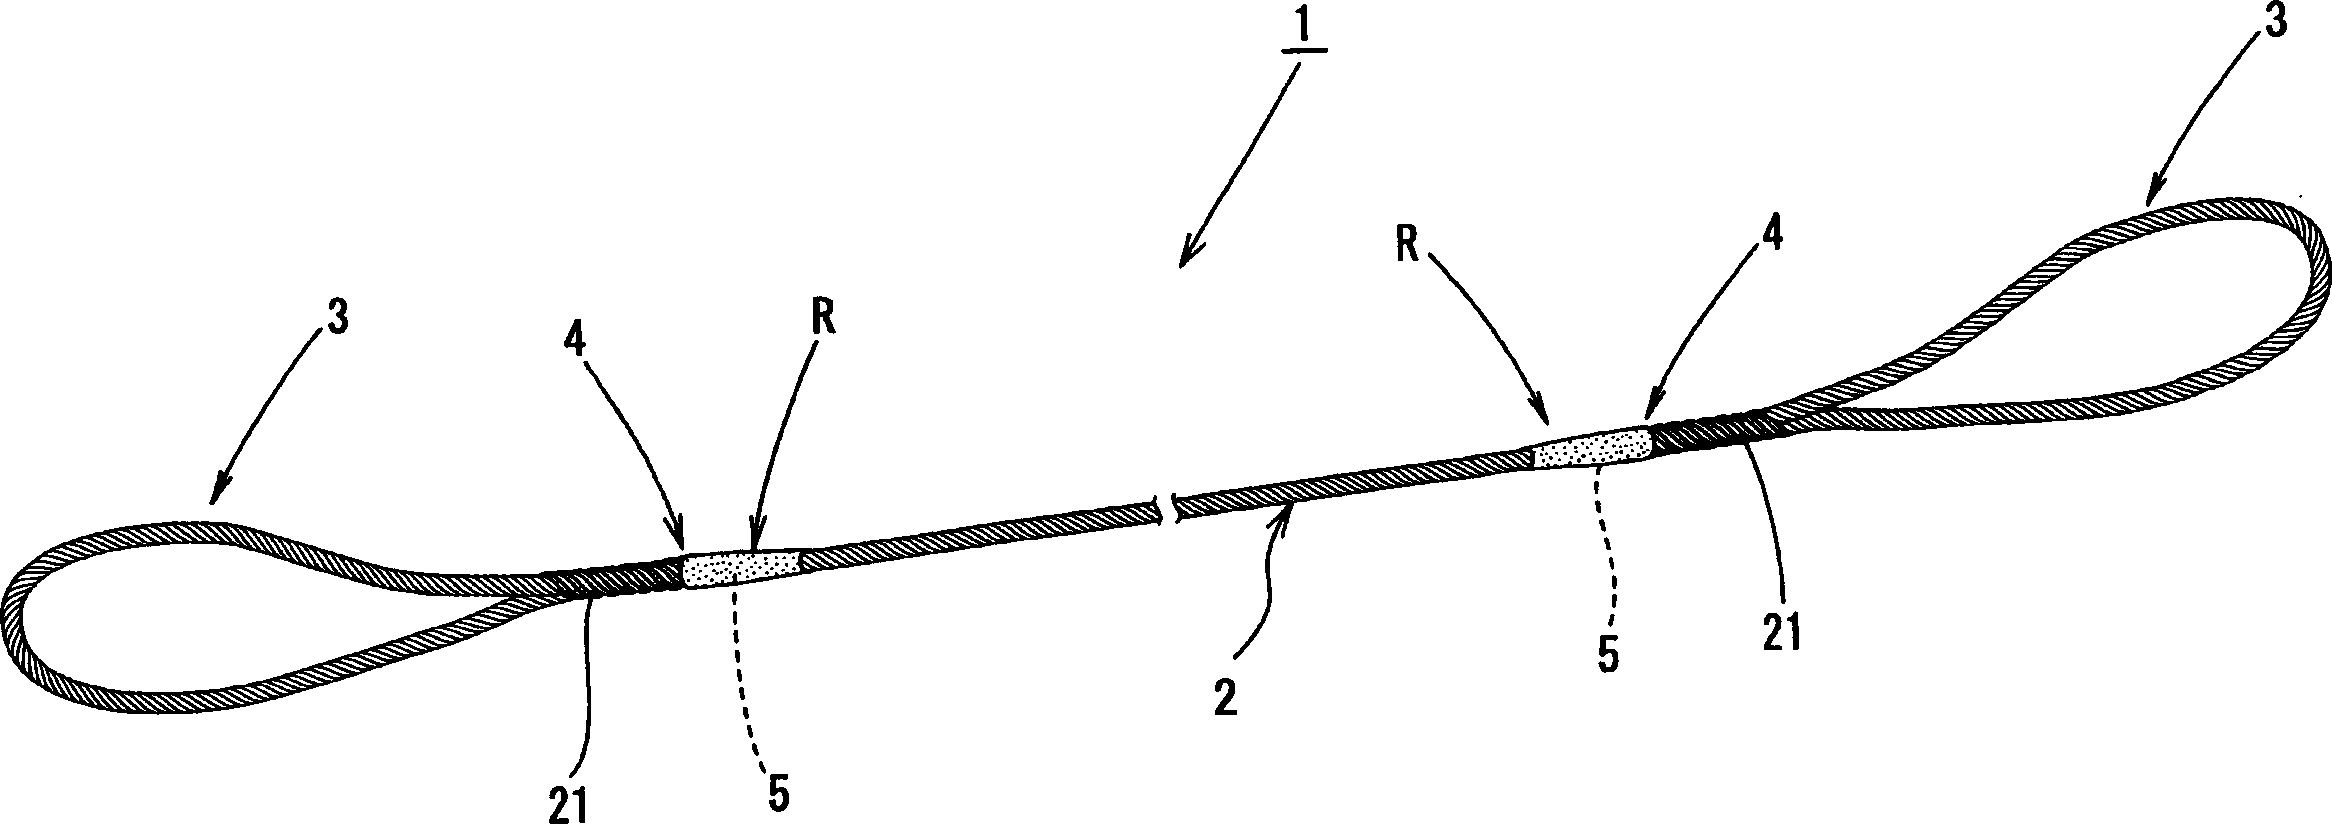 Treating structure for sling rope weaving and inserting terminal